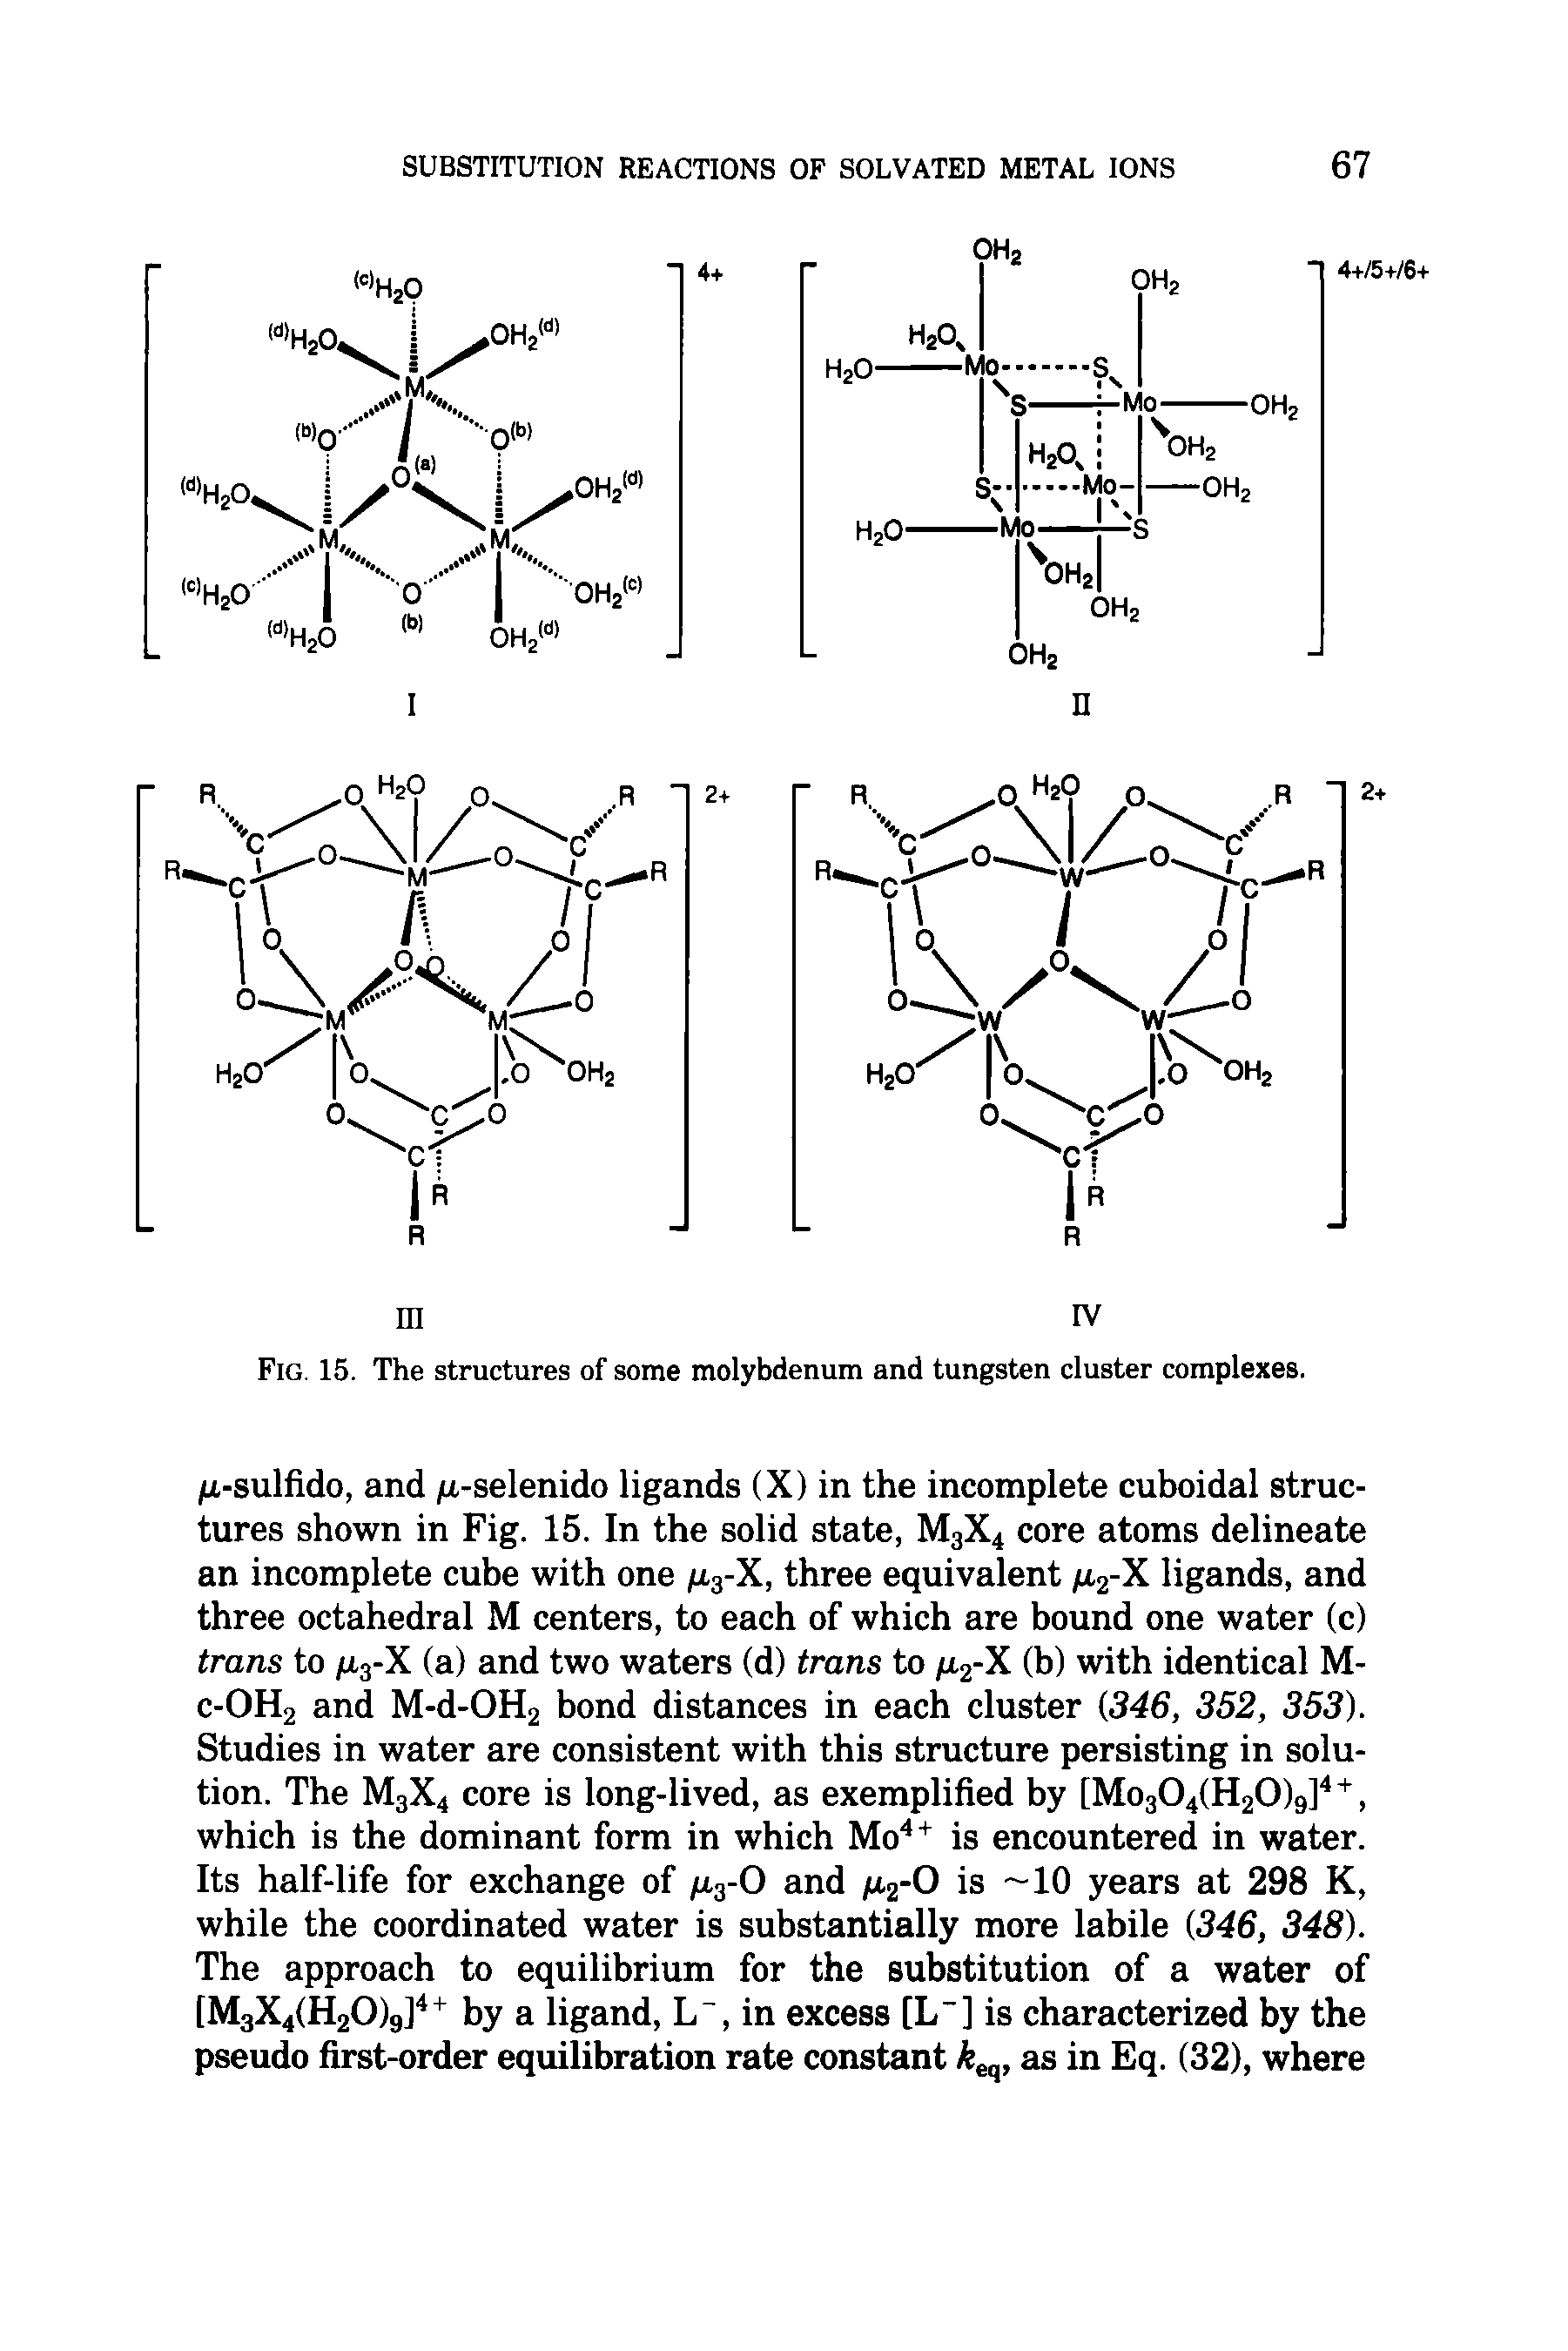 Fig. 15. The structures of some molybdenum and tungsten cluster complexes.